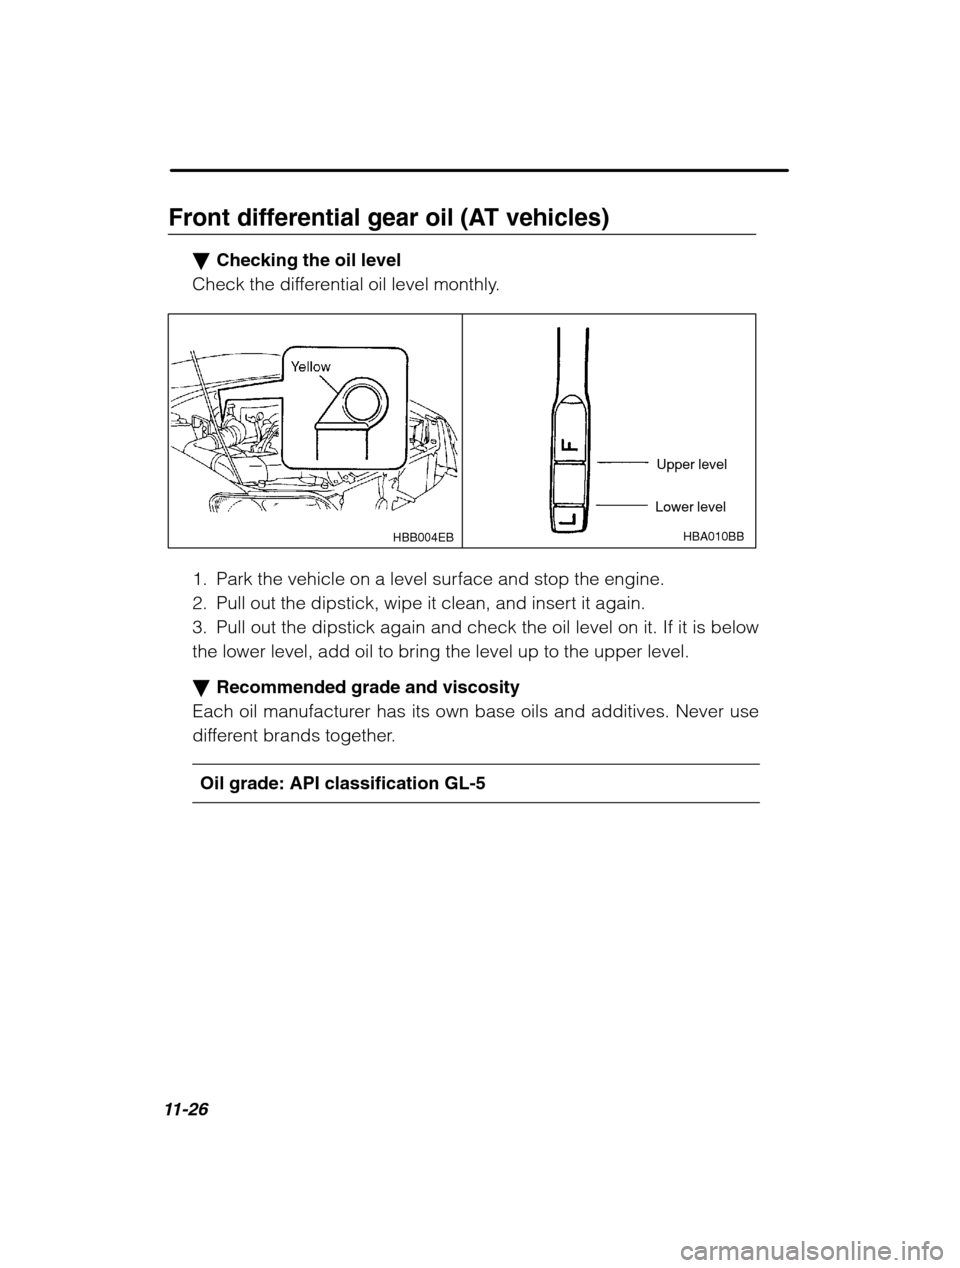 SUBARU FORESTER 2002 SG / 2.G Owners Manual 11-26
Front differential gear oil (AT vehicles)�Checking the oil level
Check the differential oil level monthly.
HBA010BB
Lower level Upper levelHBB004EB
1. Park the vehicle on a level surface and sto